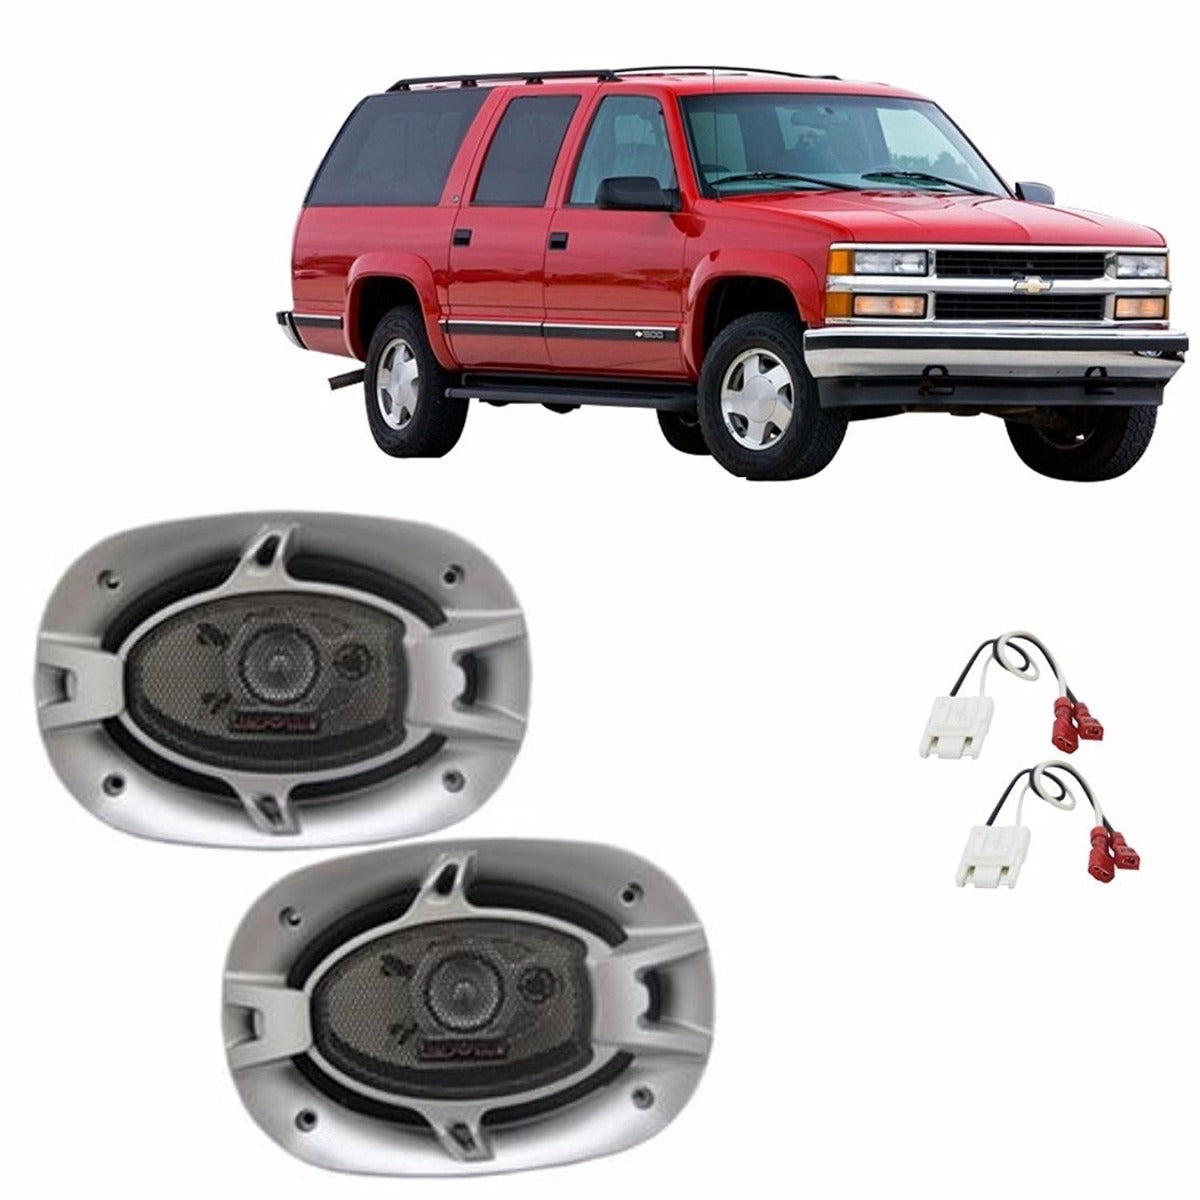 Absolute BLS-4602 Speakers Fits Rear Factory Speaker Replacement Package for 1988-1994 Chevy Suburban Absolute BLS-4602 Replacement